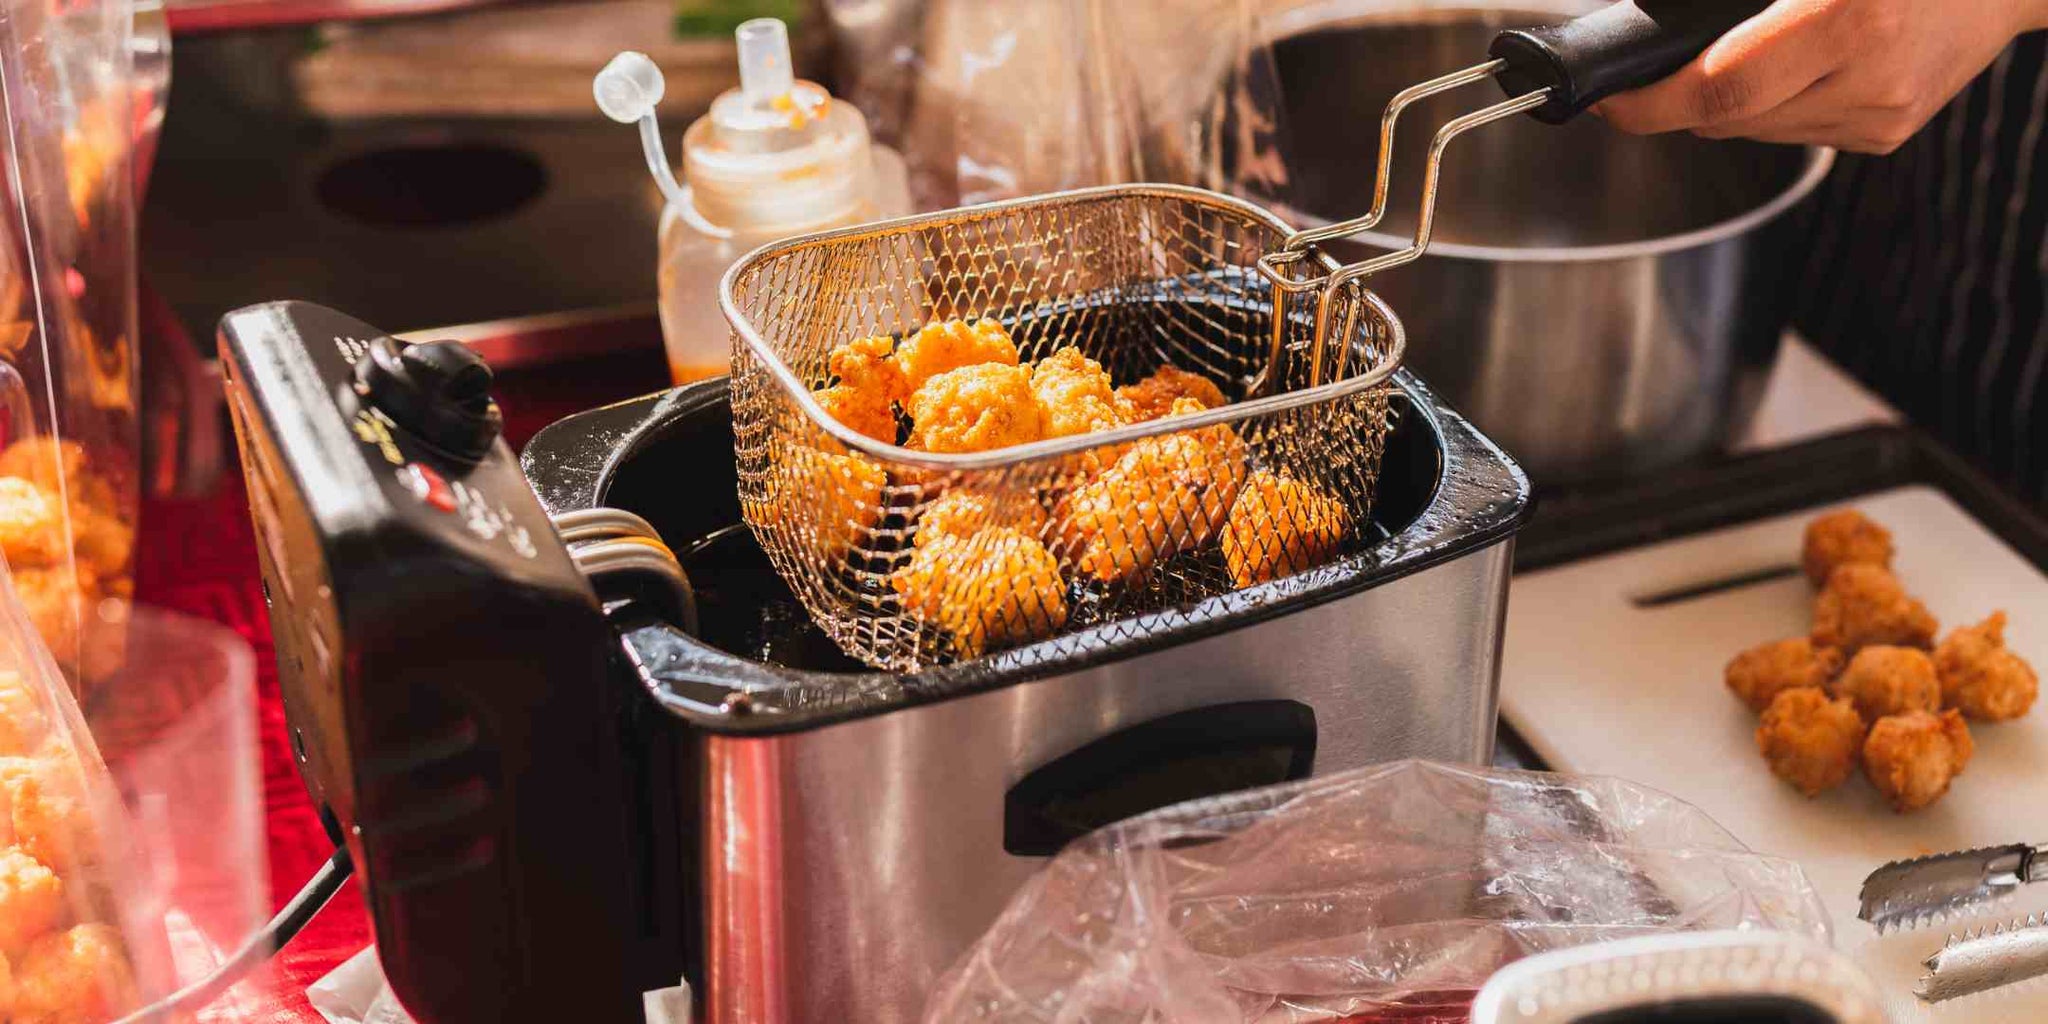 Maintenance Tips To Keep Your Deep Fryer In Its Prime Shape